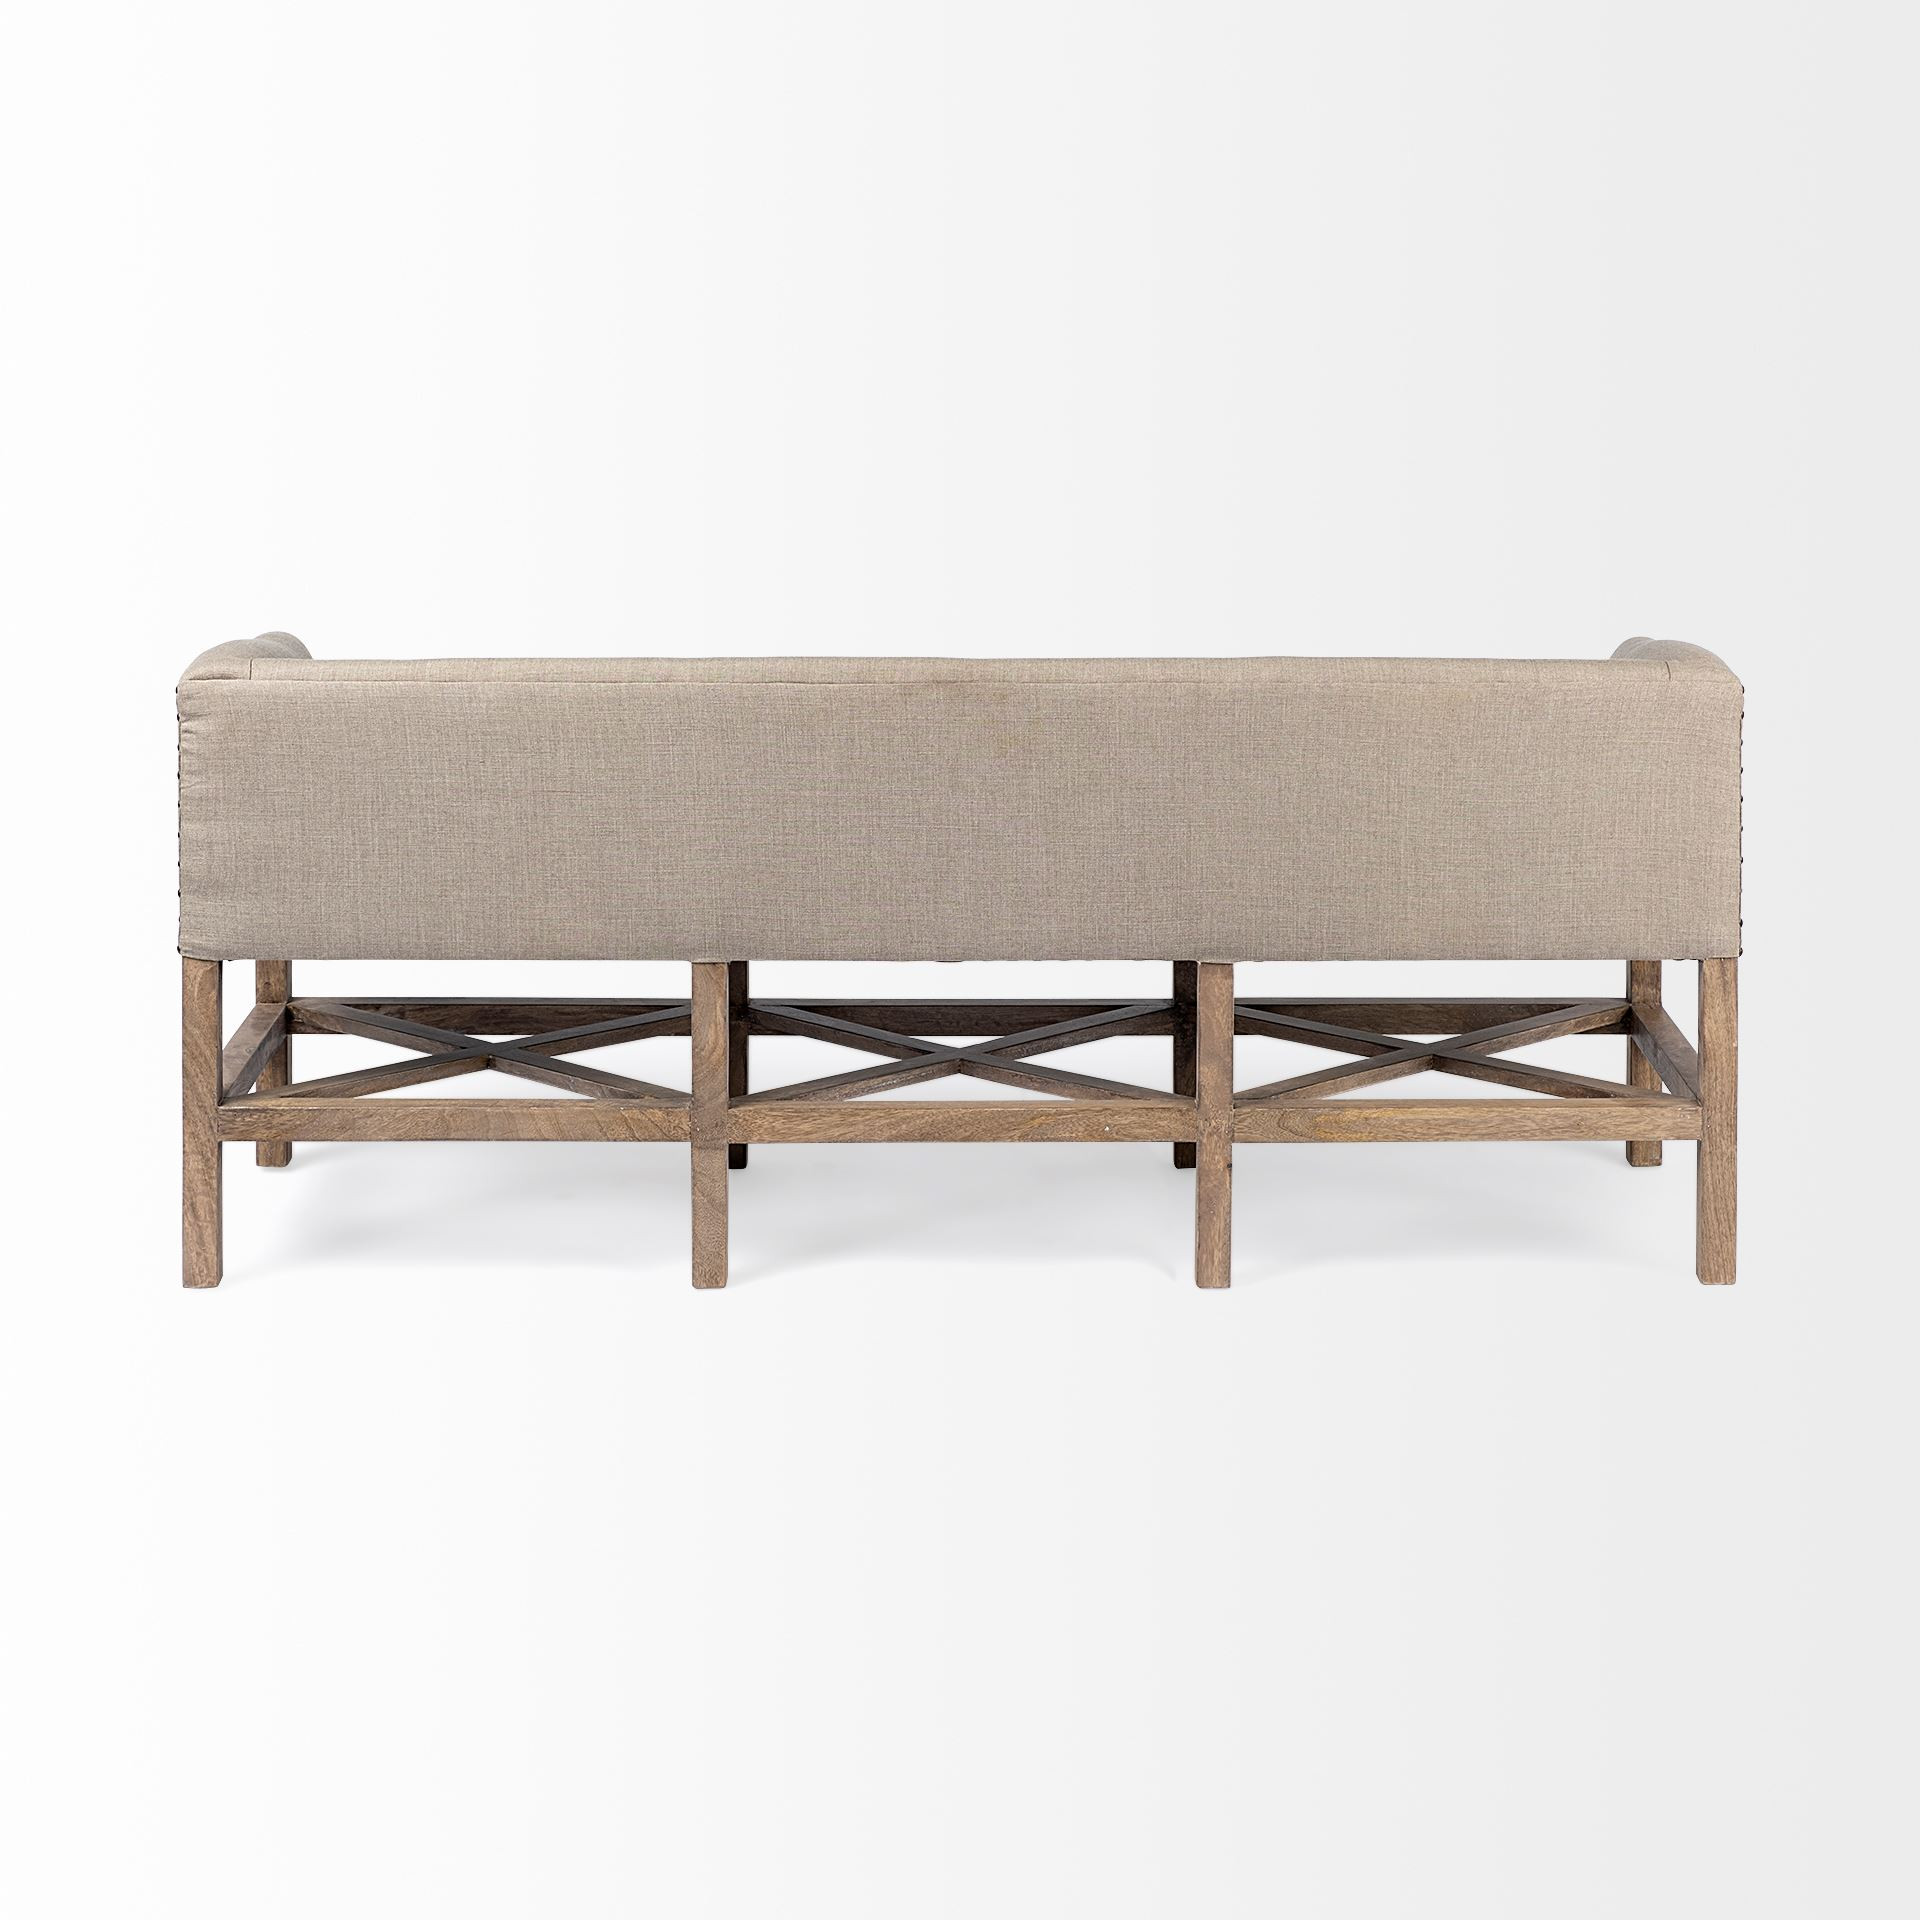 Rectangular Mango Wood/Light Brown Finish W/ Beige Fabric Covered Seat Accent Bench